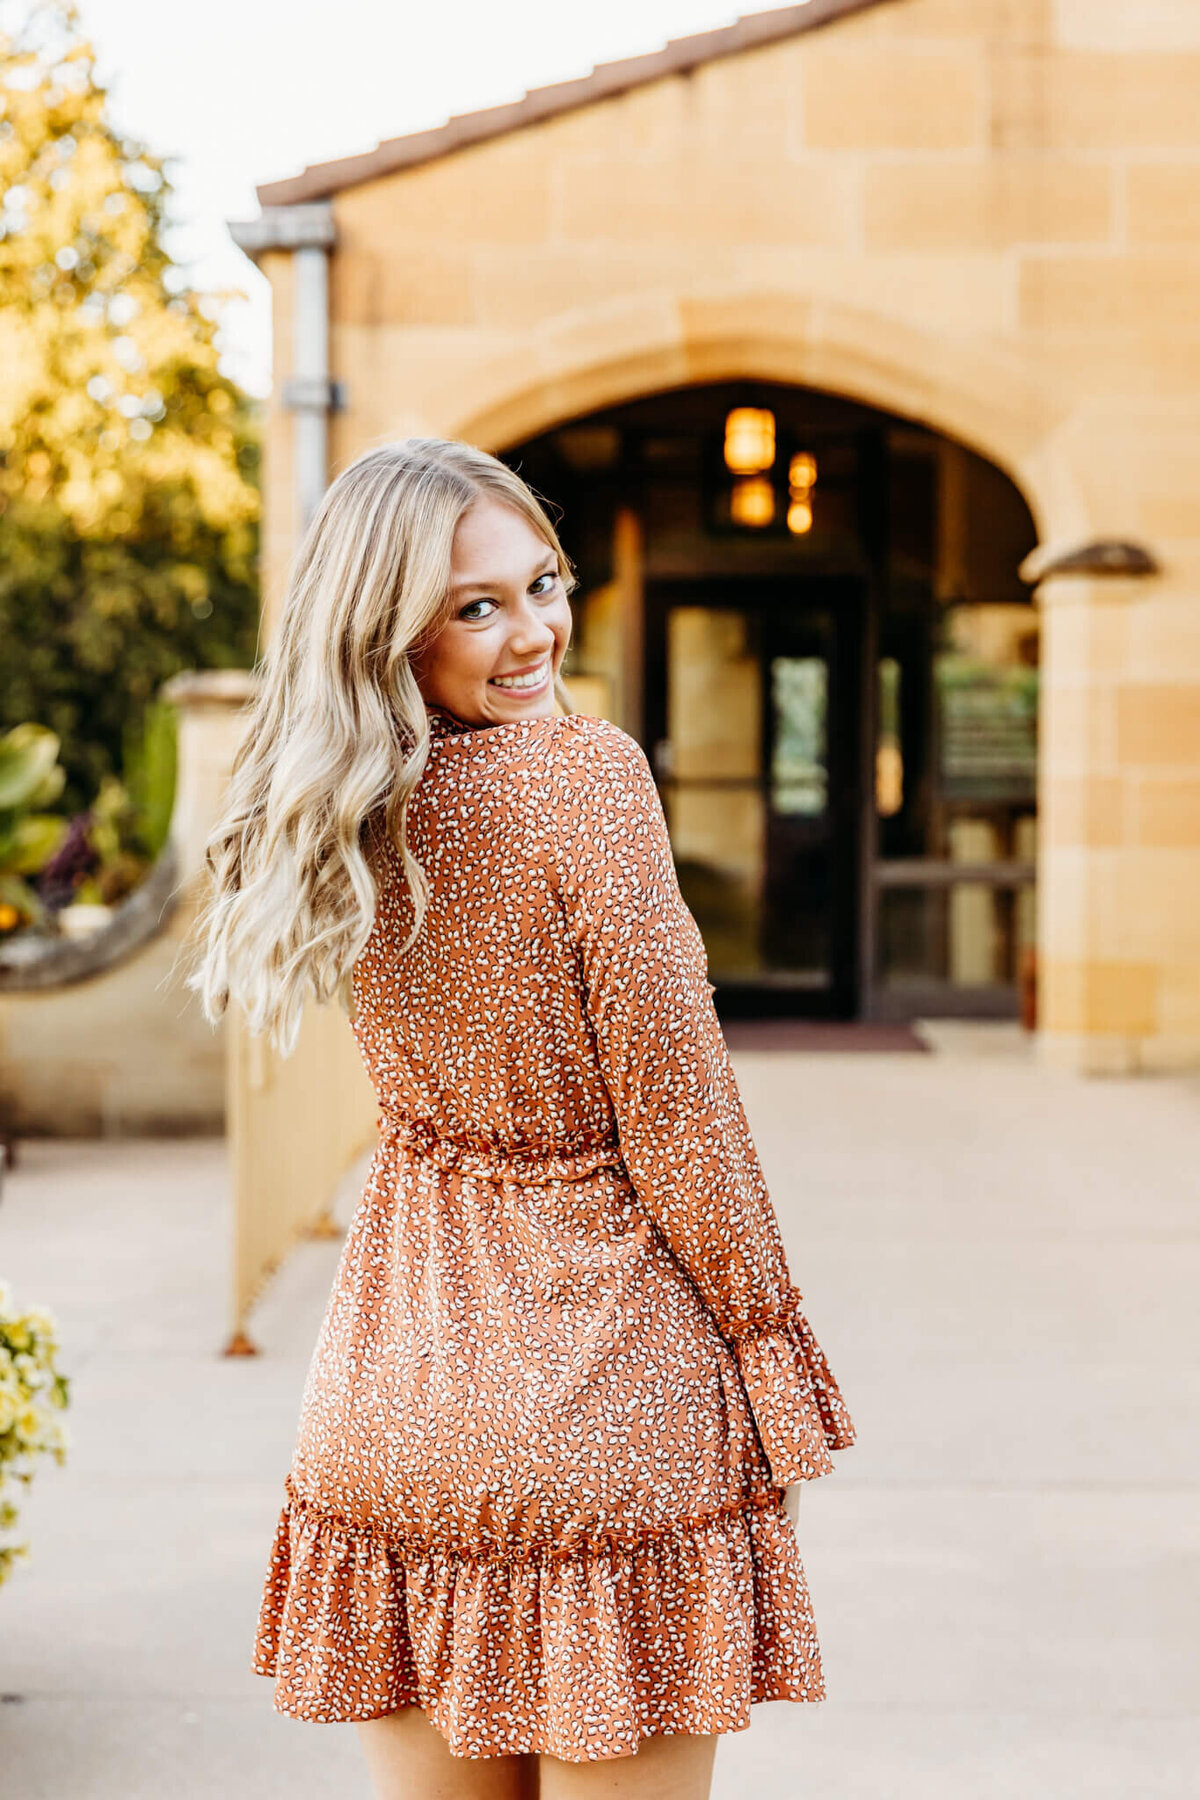 blonde high school girl spinning in her orange dress and looking back as she smiles for her senior photos